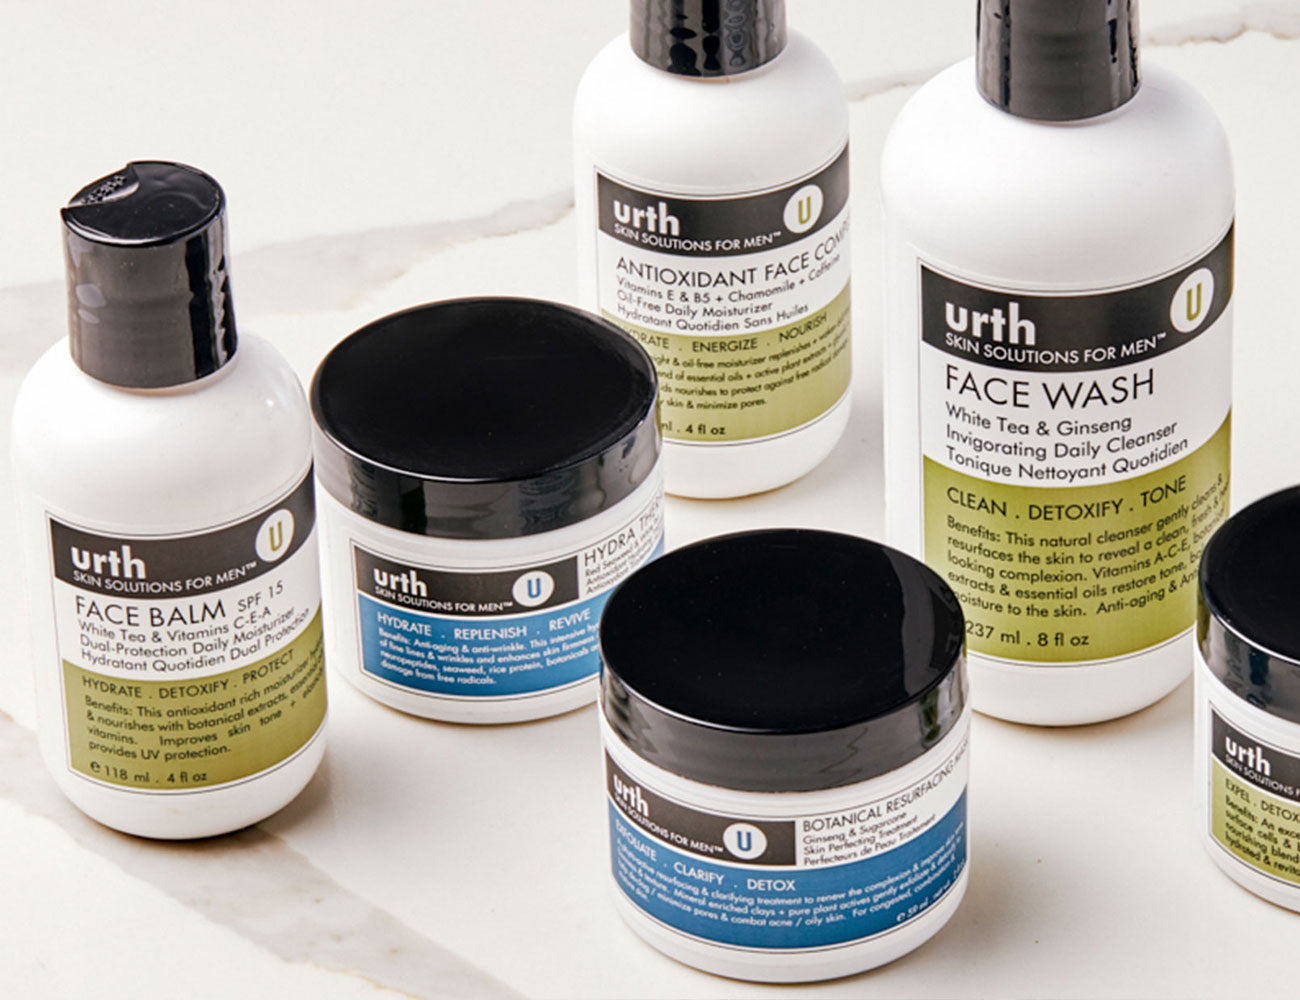 10 Questions With Bob Mah, Founder Of urth Skincare For Men